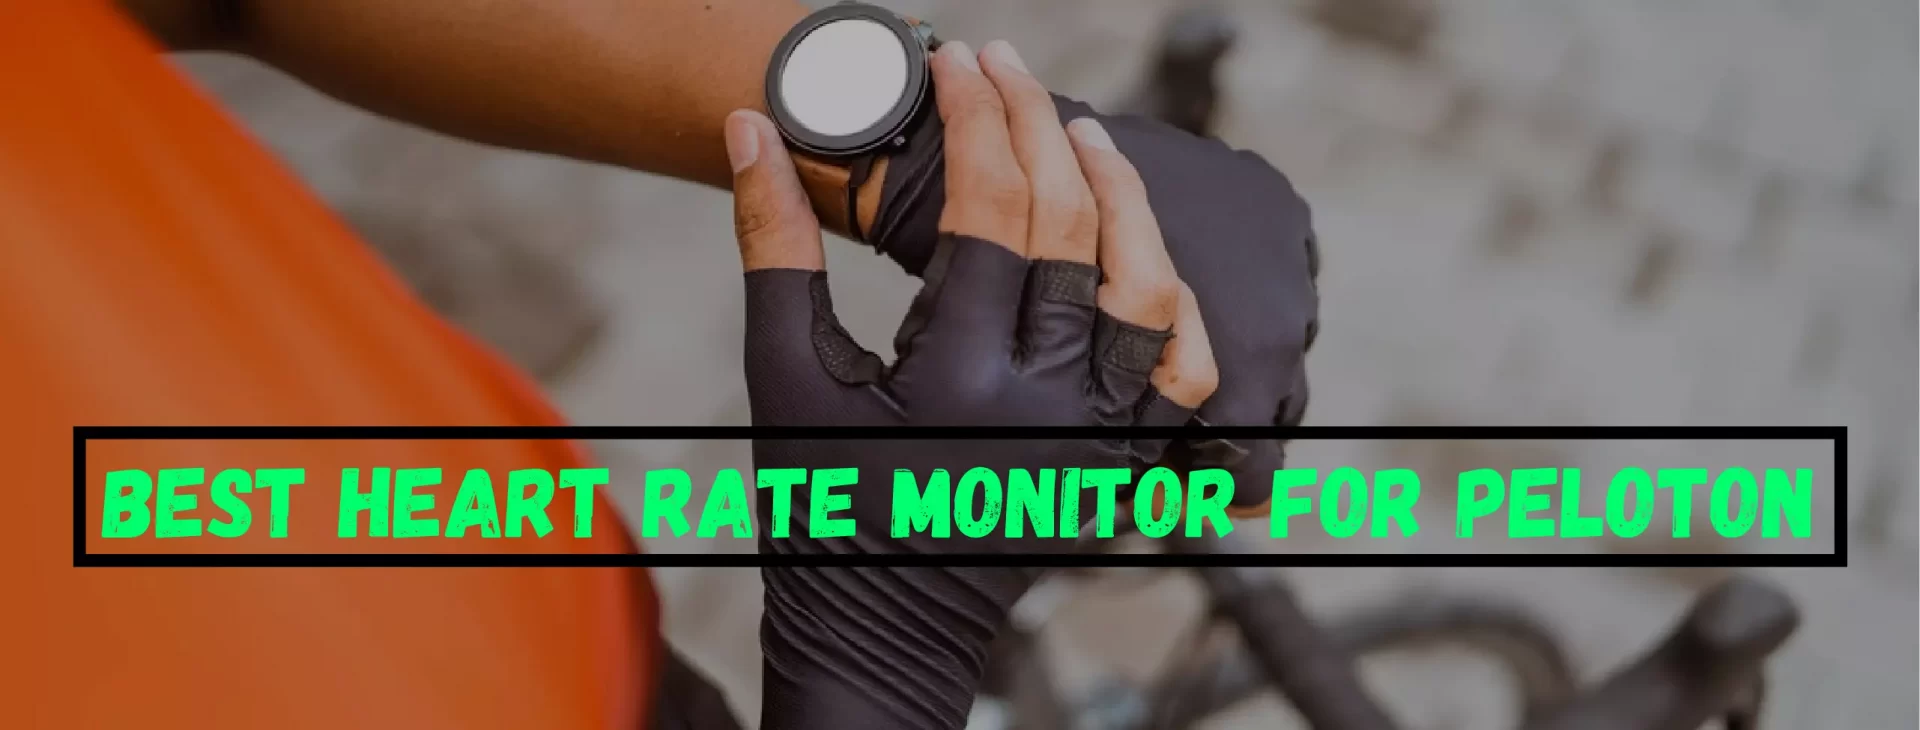 Best Heart Rate Monitor For Peloton